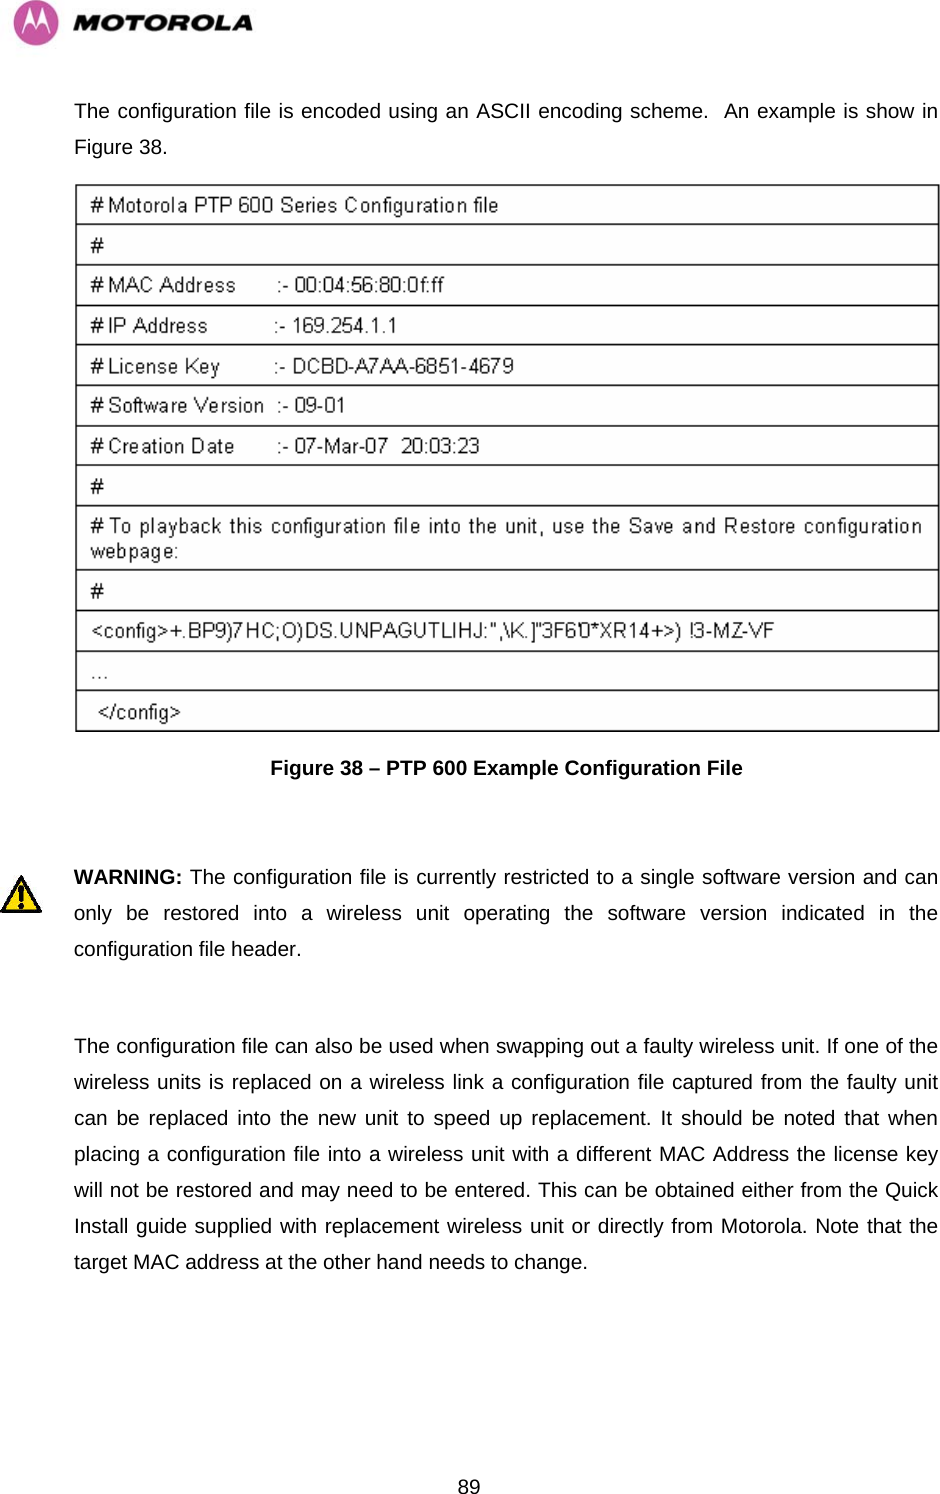   89The configuration file is encoded using an ASCII encoding scheme.  An example is show in Figure 38.  Figure 38 – PTP 600 Example Configuration File  WARNING: The configuration file is currently restricted to a single software version and can only be restored into a wireless unit operating the software version indicated in the configuration file header.  The configuration file can also be used when swapping out a faulty wireless unit. If one of the wireless units is replaced on a wireless link a configuration file captured from the faulty unit can be replaced into the new unit to speed up replacement. It should be noted that when placing a configuration file into a wireless unit with a different MAC Address the license key will not be restored and may need to be entered. This can be obtained either from the Quick Install guide supplied with replacement wireless unit or directly from Motorola. Note that the target MAC address at the other hand needs to change.  